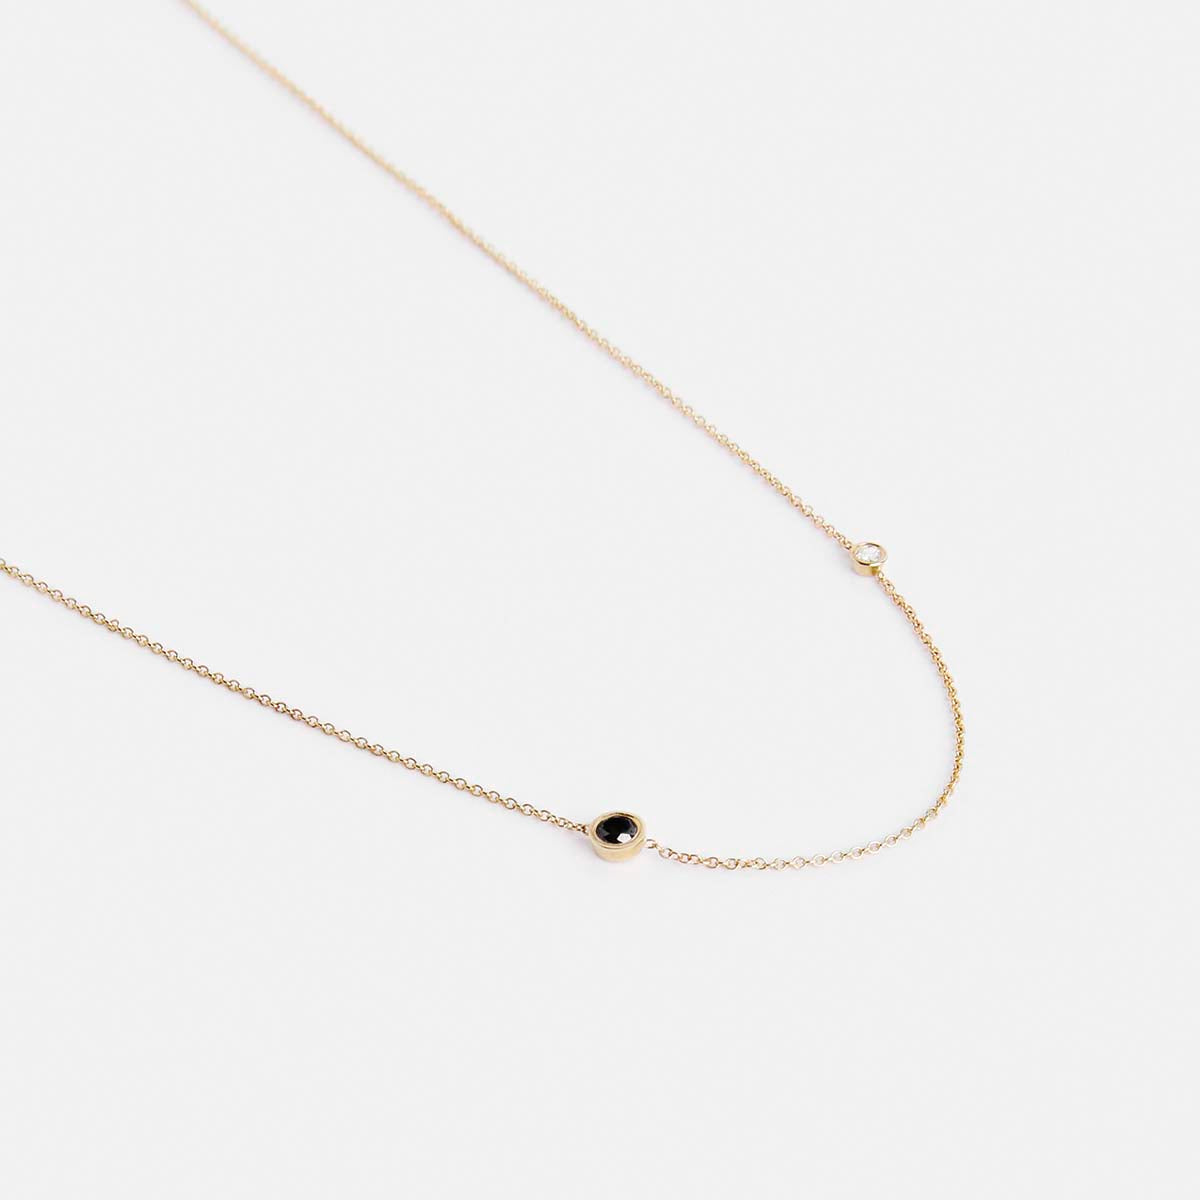 Iba Alternative Necklace in 14k Gold set with Black and White Diamonds By SHW Fine Jewelry NYC